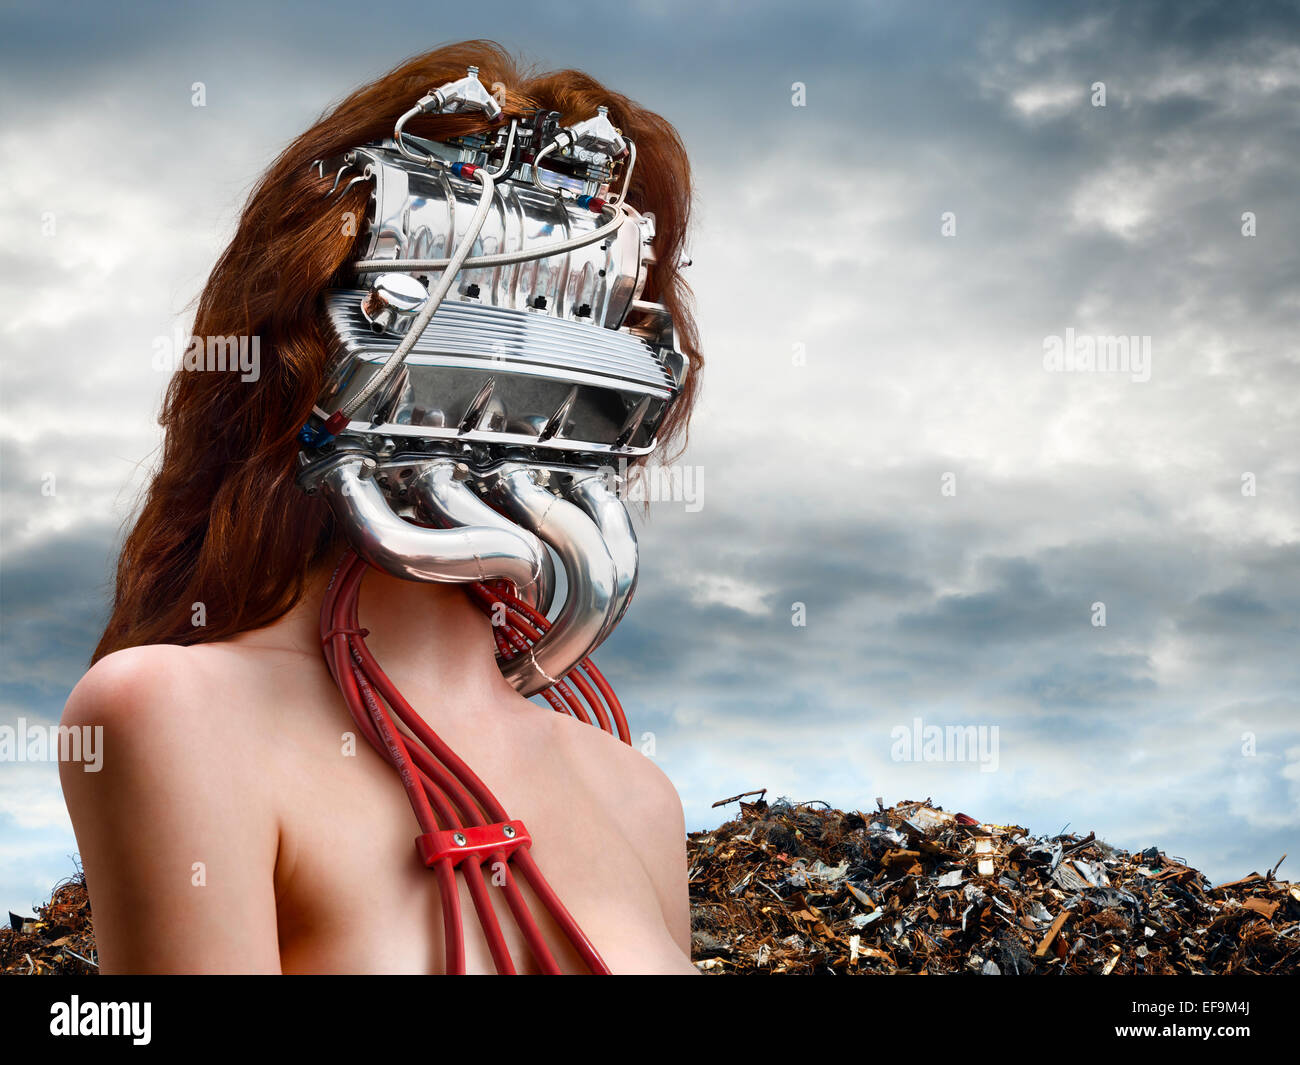 Horizontal fantasy image of woman with a car engine for a head with a junkyard behind her Stock Photo